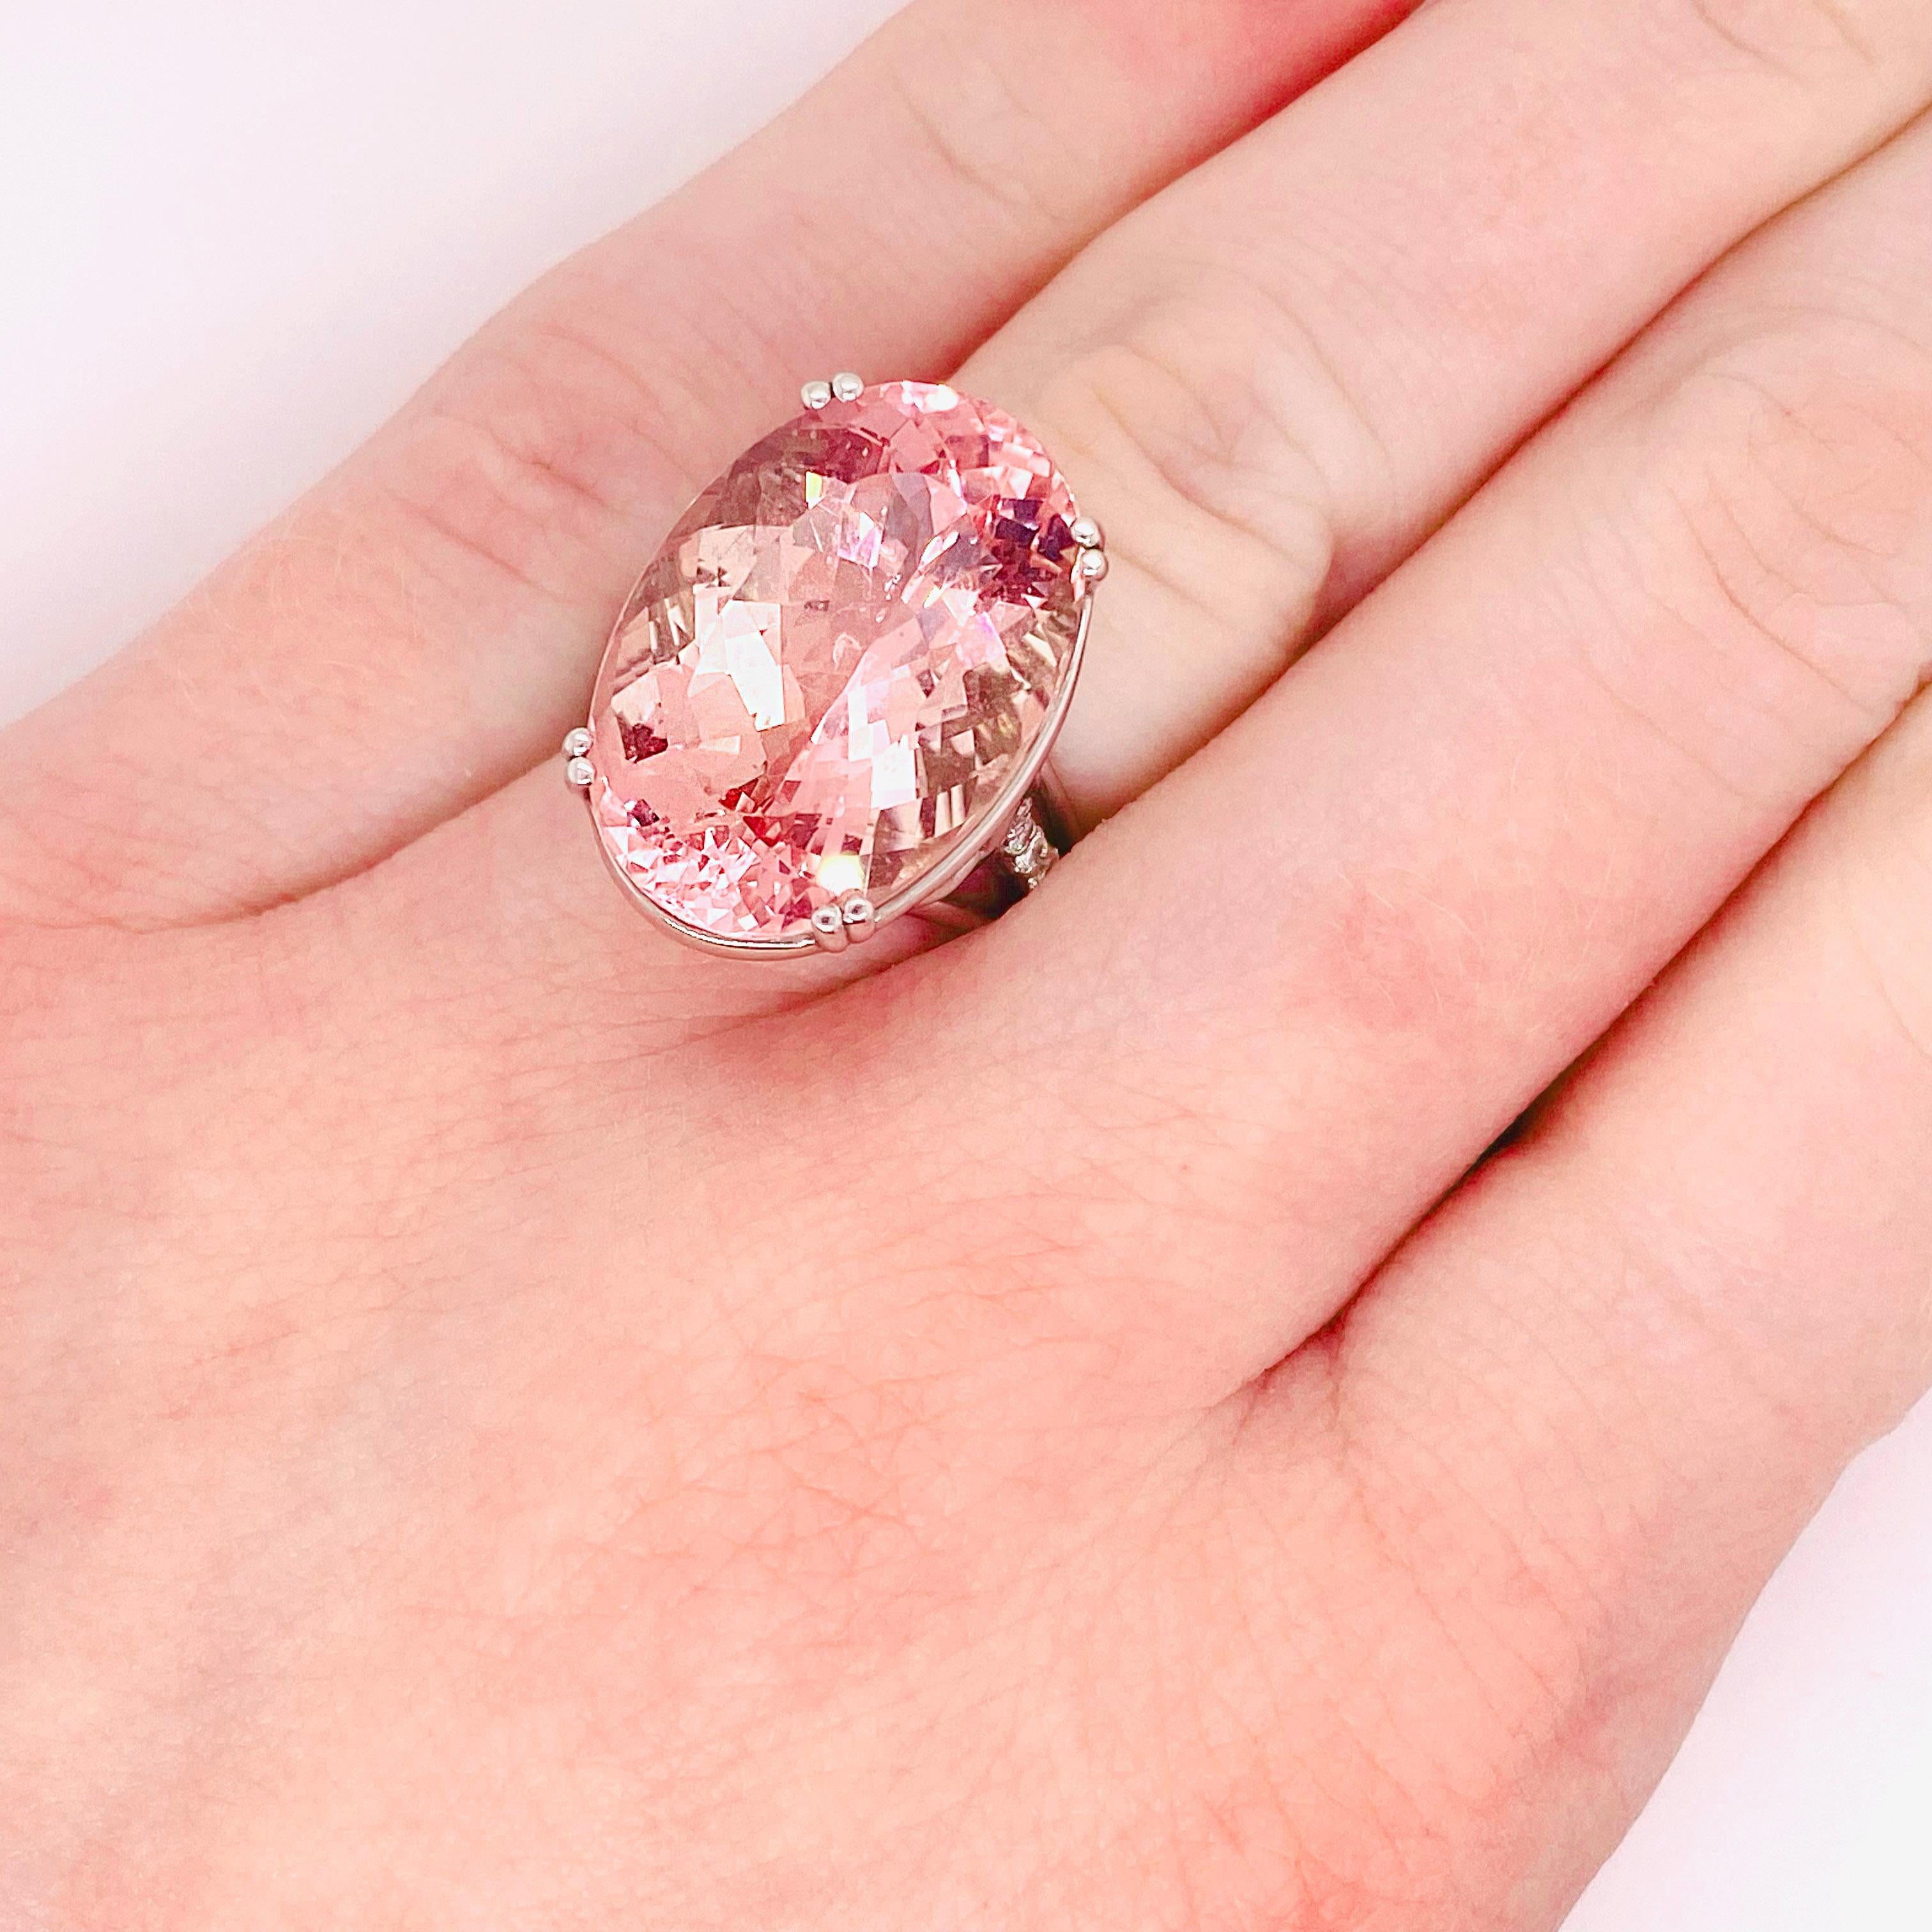 Original Morganite and Diamond Ring in 14 karat white gold made by our shop and one-of-a-kind. This is their most valuable morganite ever seen! We did not make a mold so this design will never be made again! The ring is a Five Star Jewelry Brokers